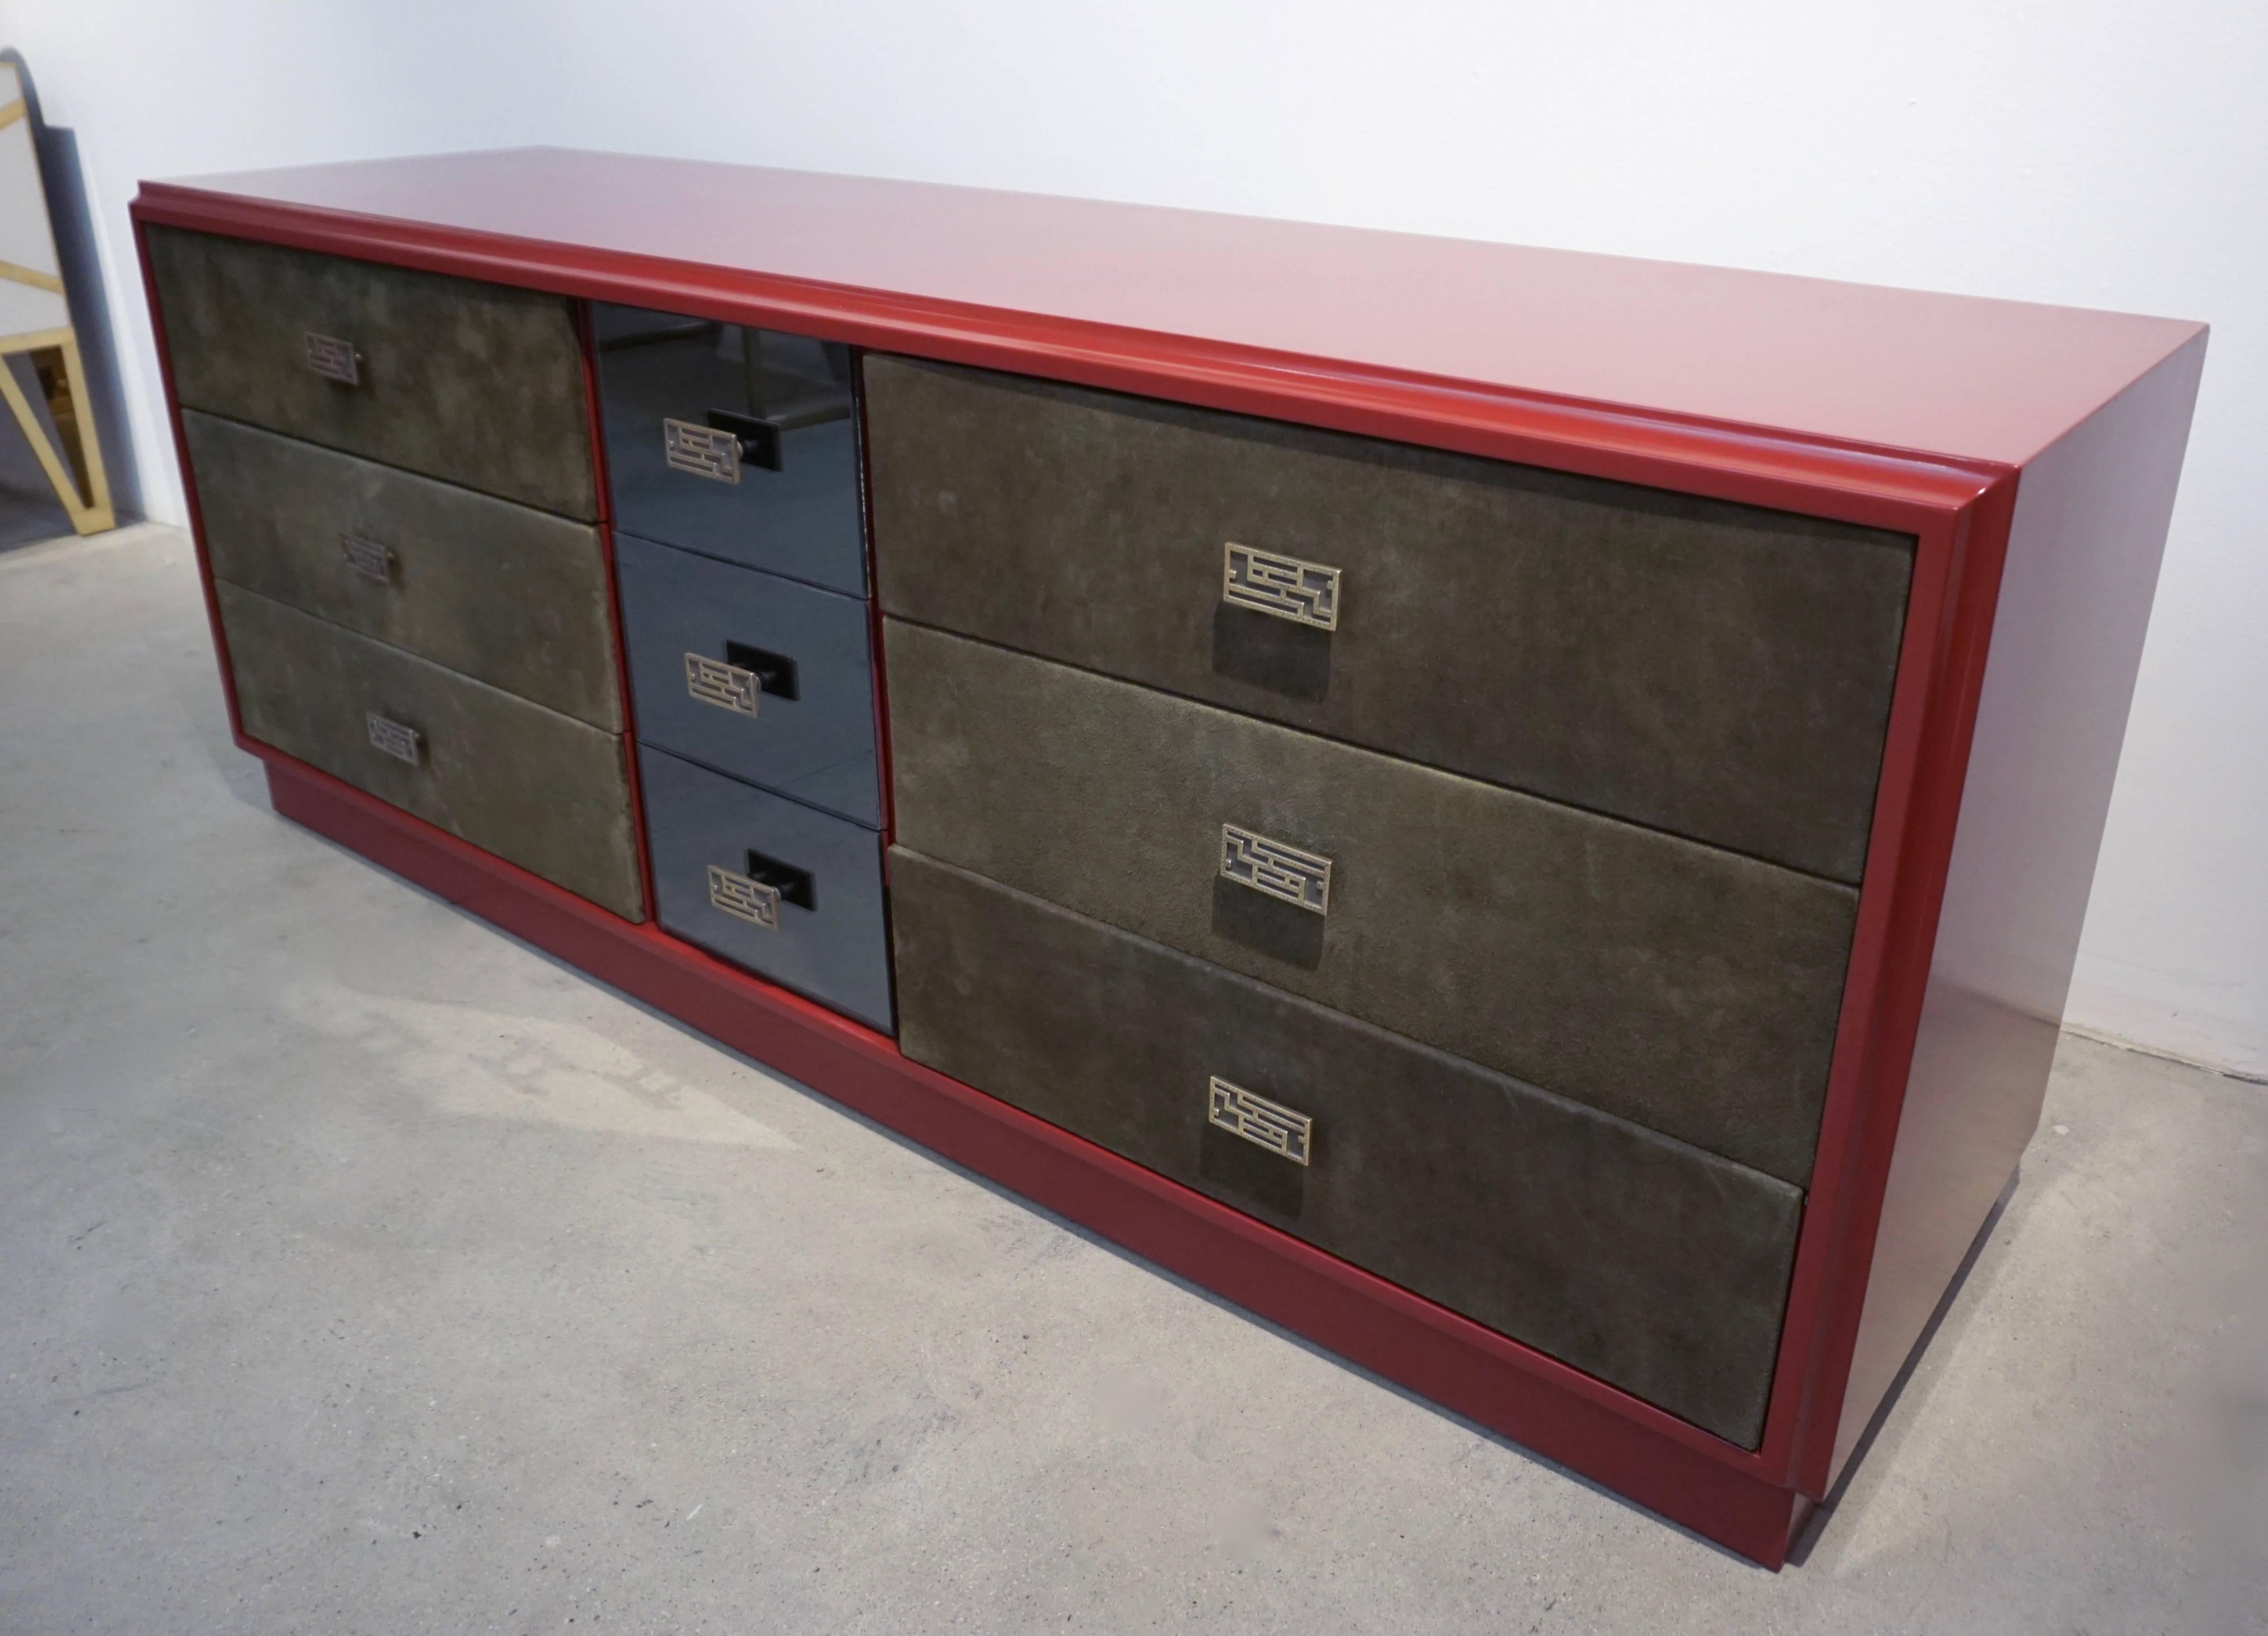 This nine-drawer vintage sideboard/credenza is a unique design attributed to Luciano Frigerio (Desio, 1928 – Sanremo 1999), an Italian designer, artist and musician. His pieces are distinguished by a great attention to details like the molded